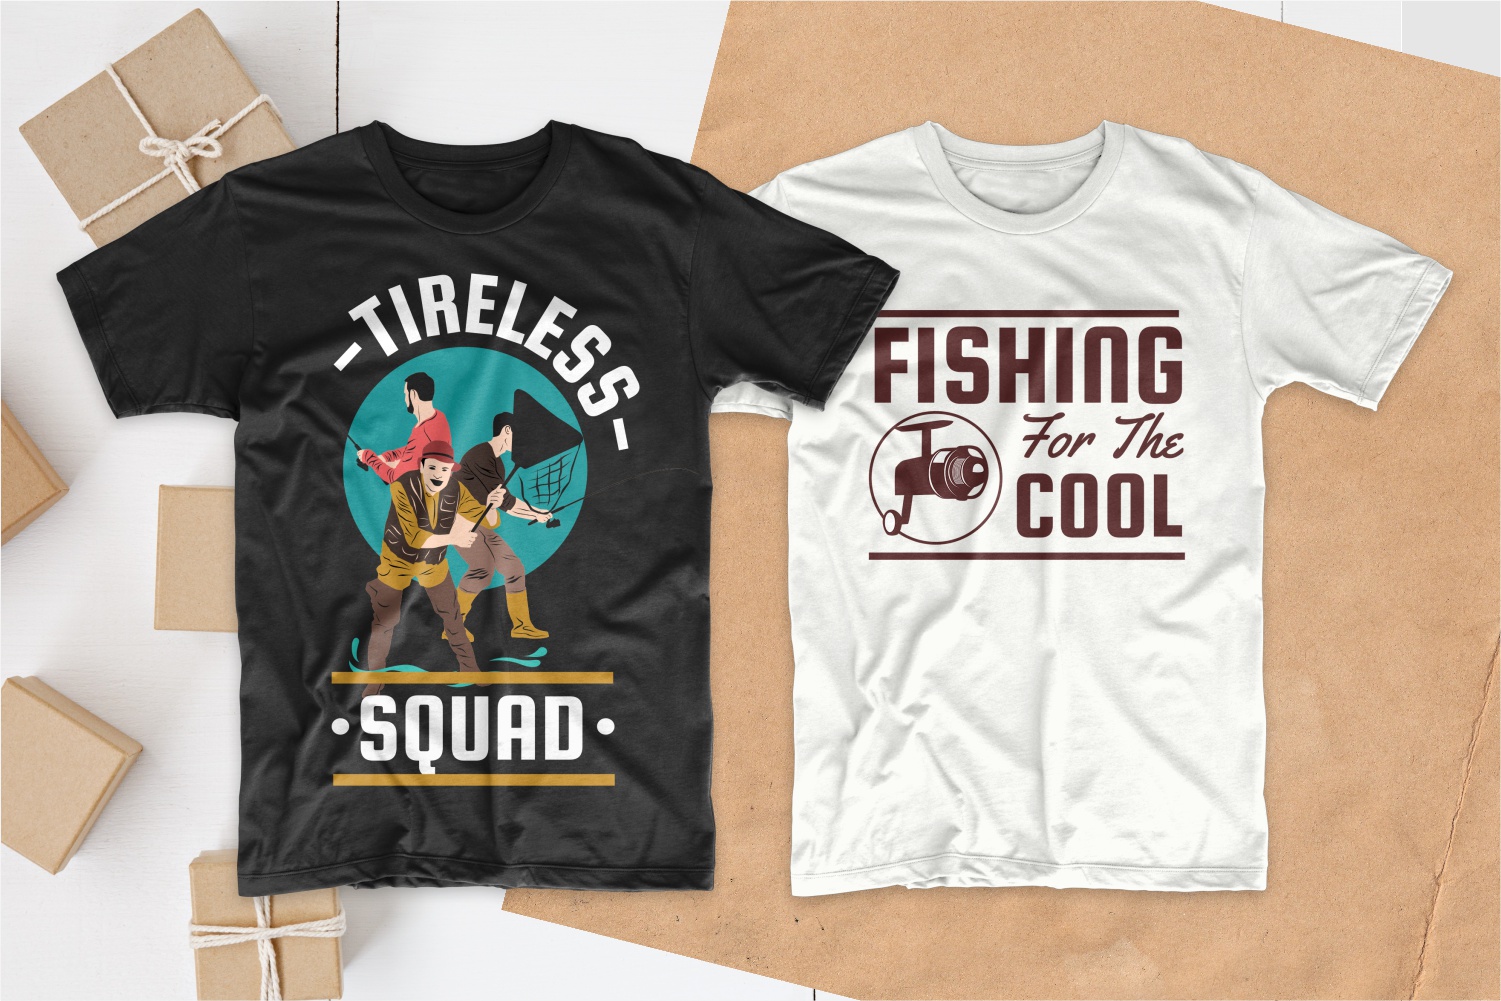 T-shirts with a group of desperate fishermen.